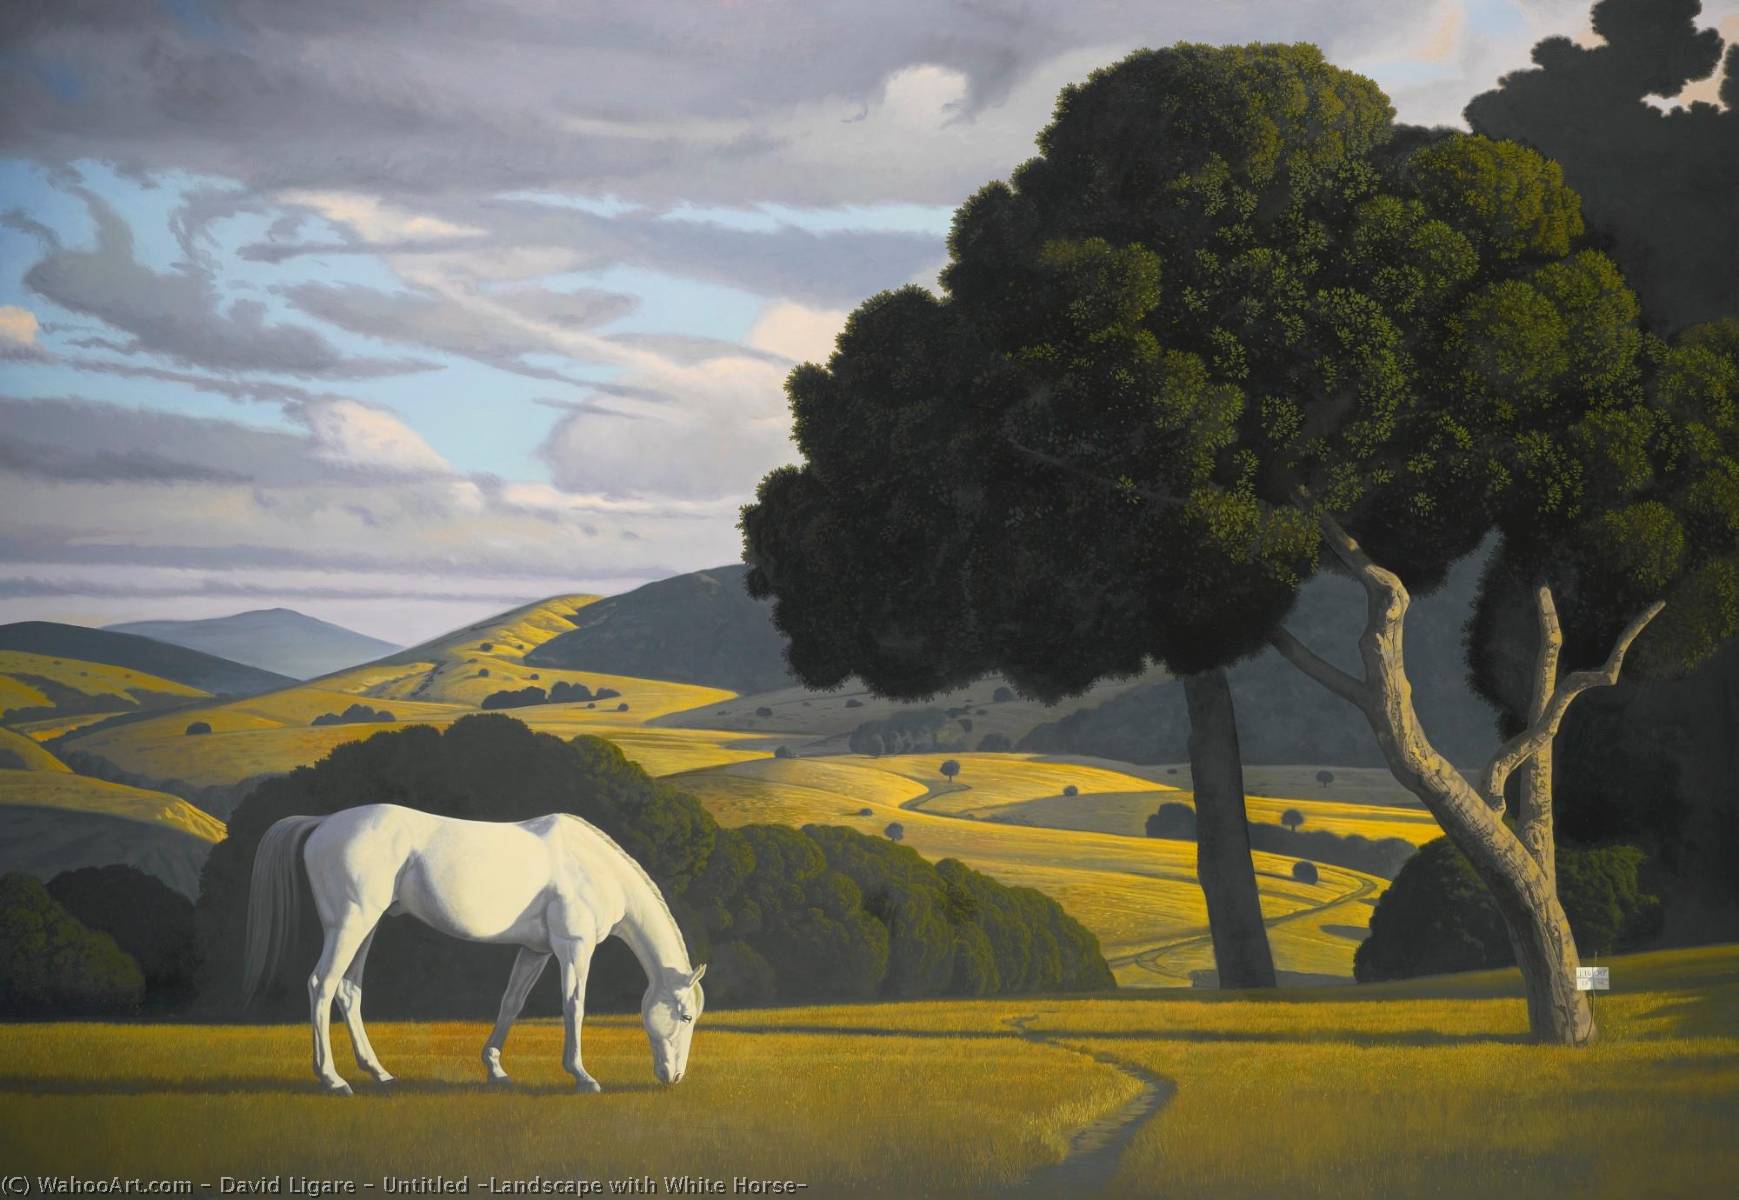 WikiOO.org - 백과 사전 - 회화, 삽화 David Ligare - Untitled (Landscape with White Horse)